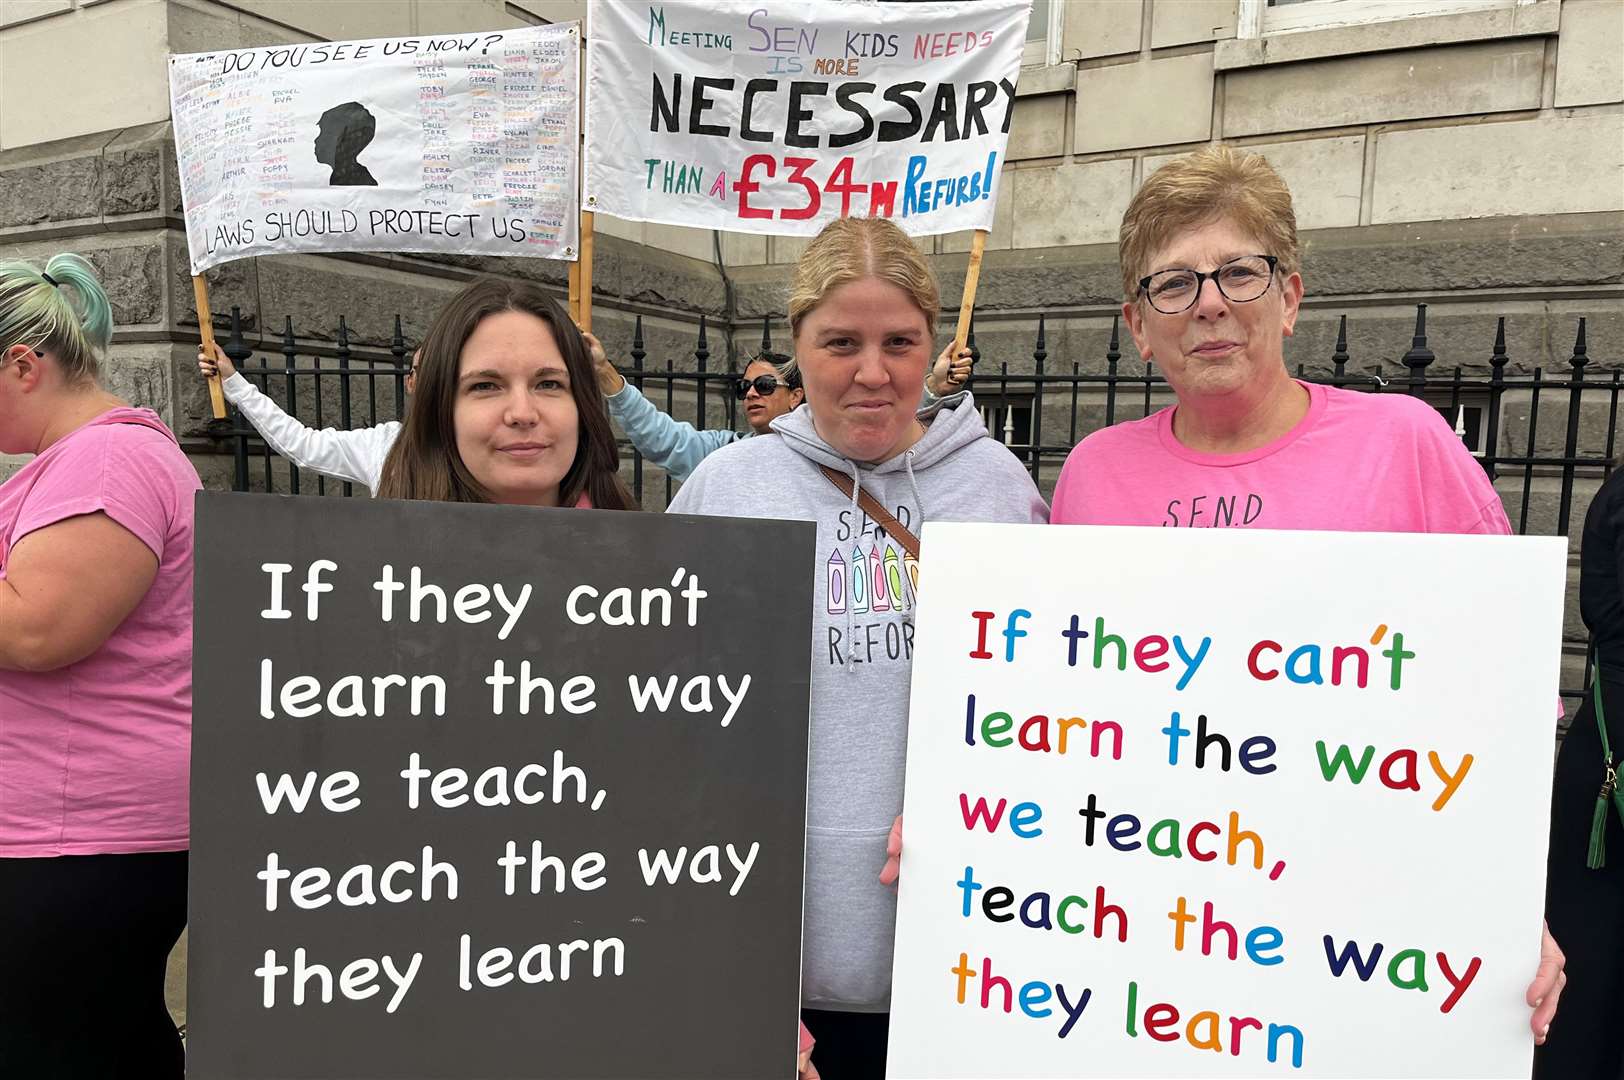 Parents and staff across the country are concerned about a lack of SEN support